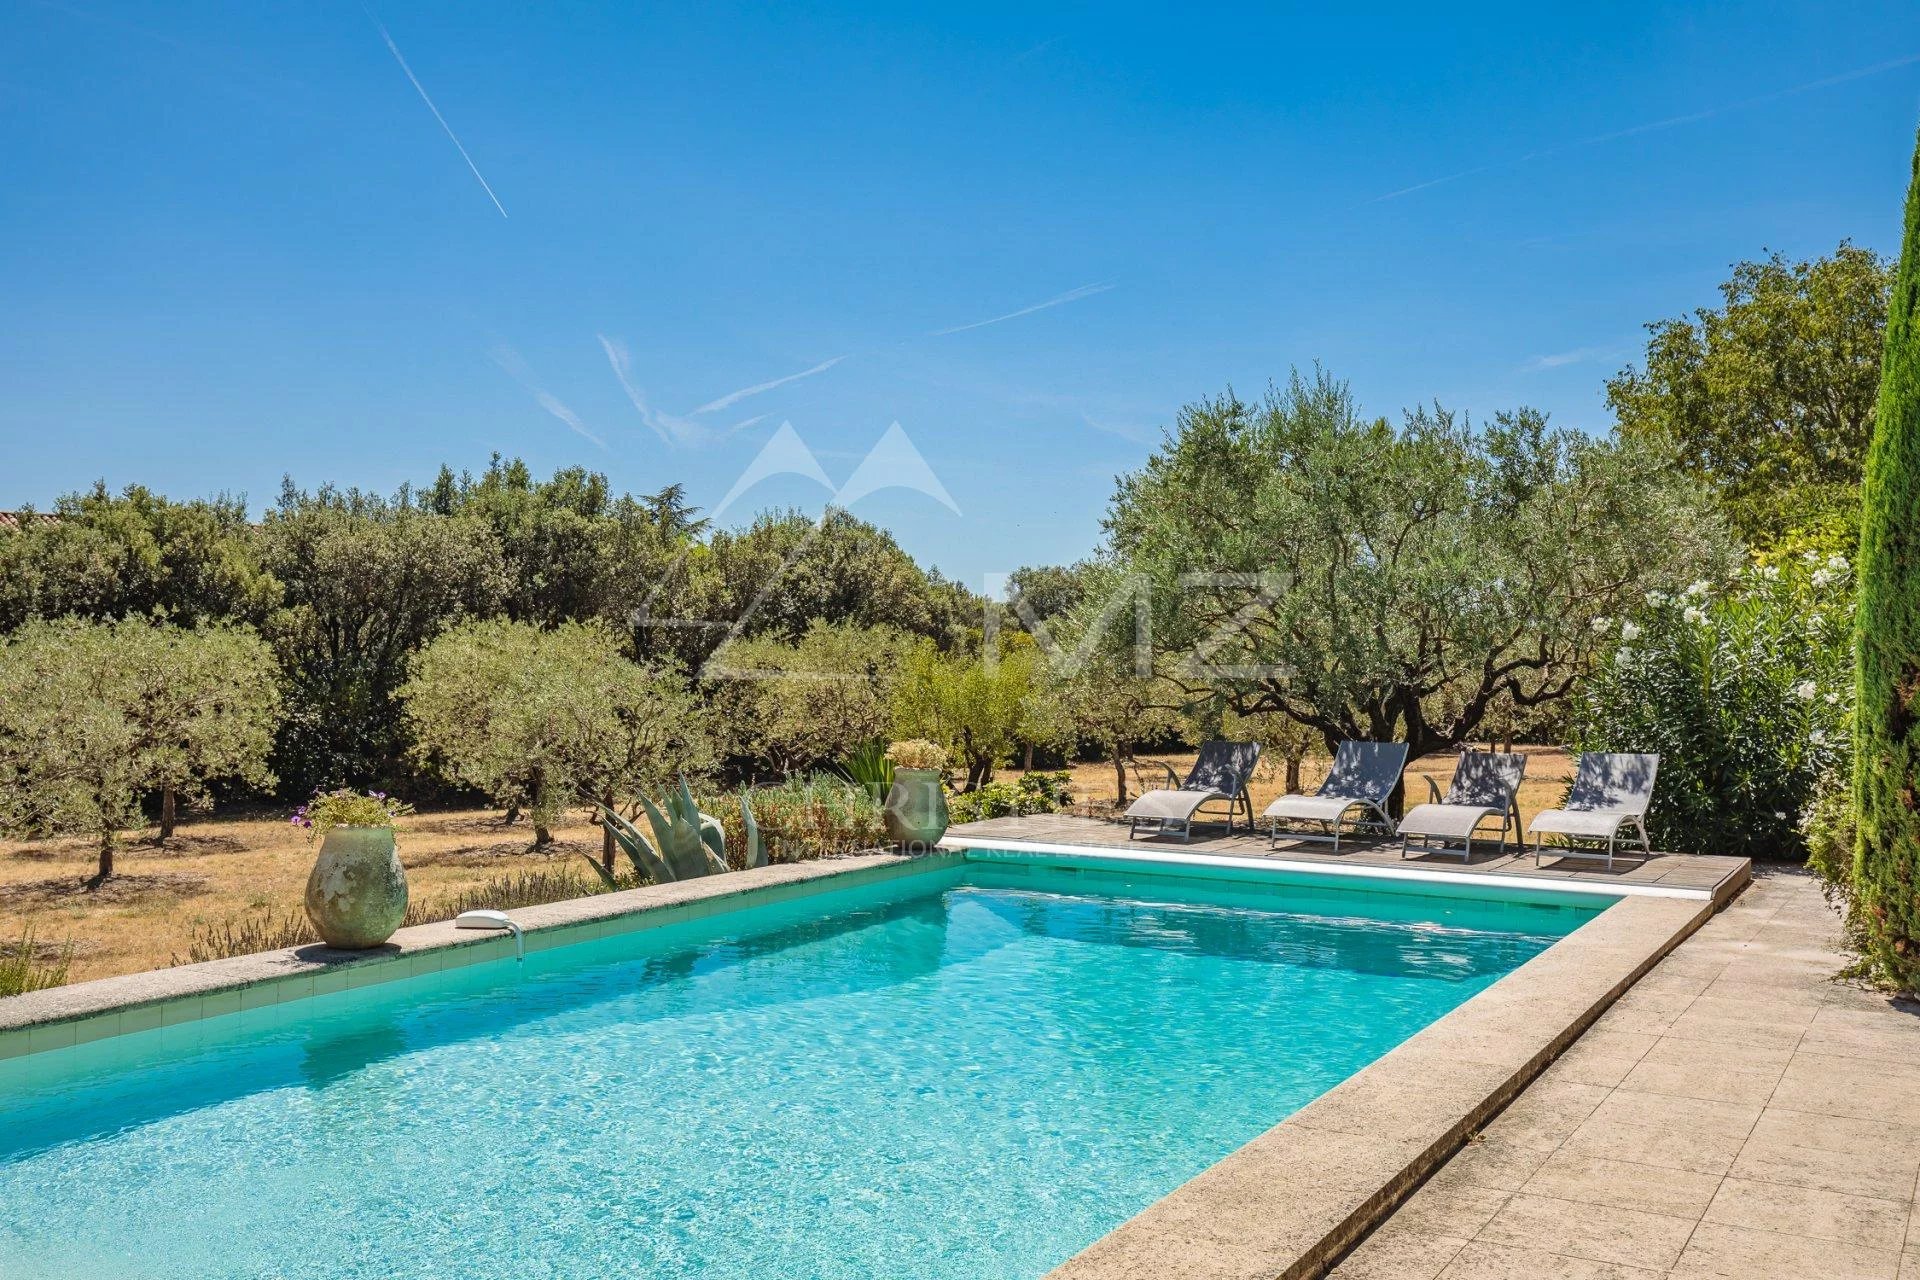 Close to Gordes - Lovely stone built holiday house